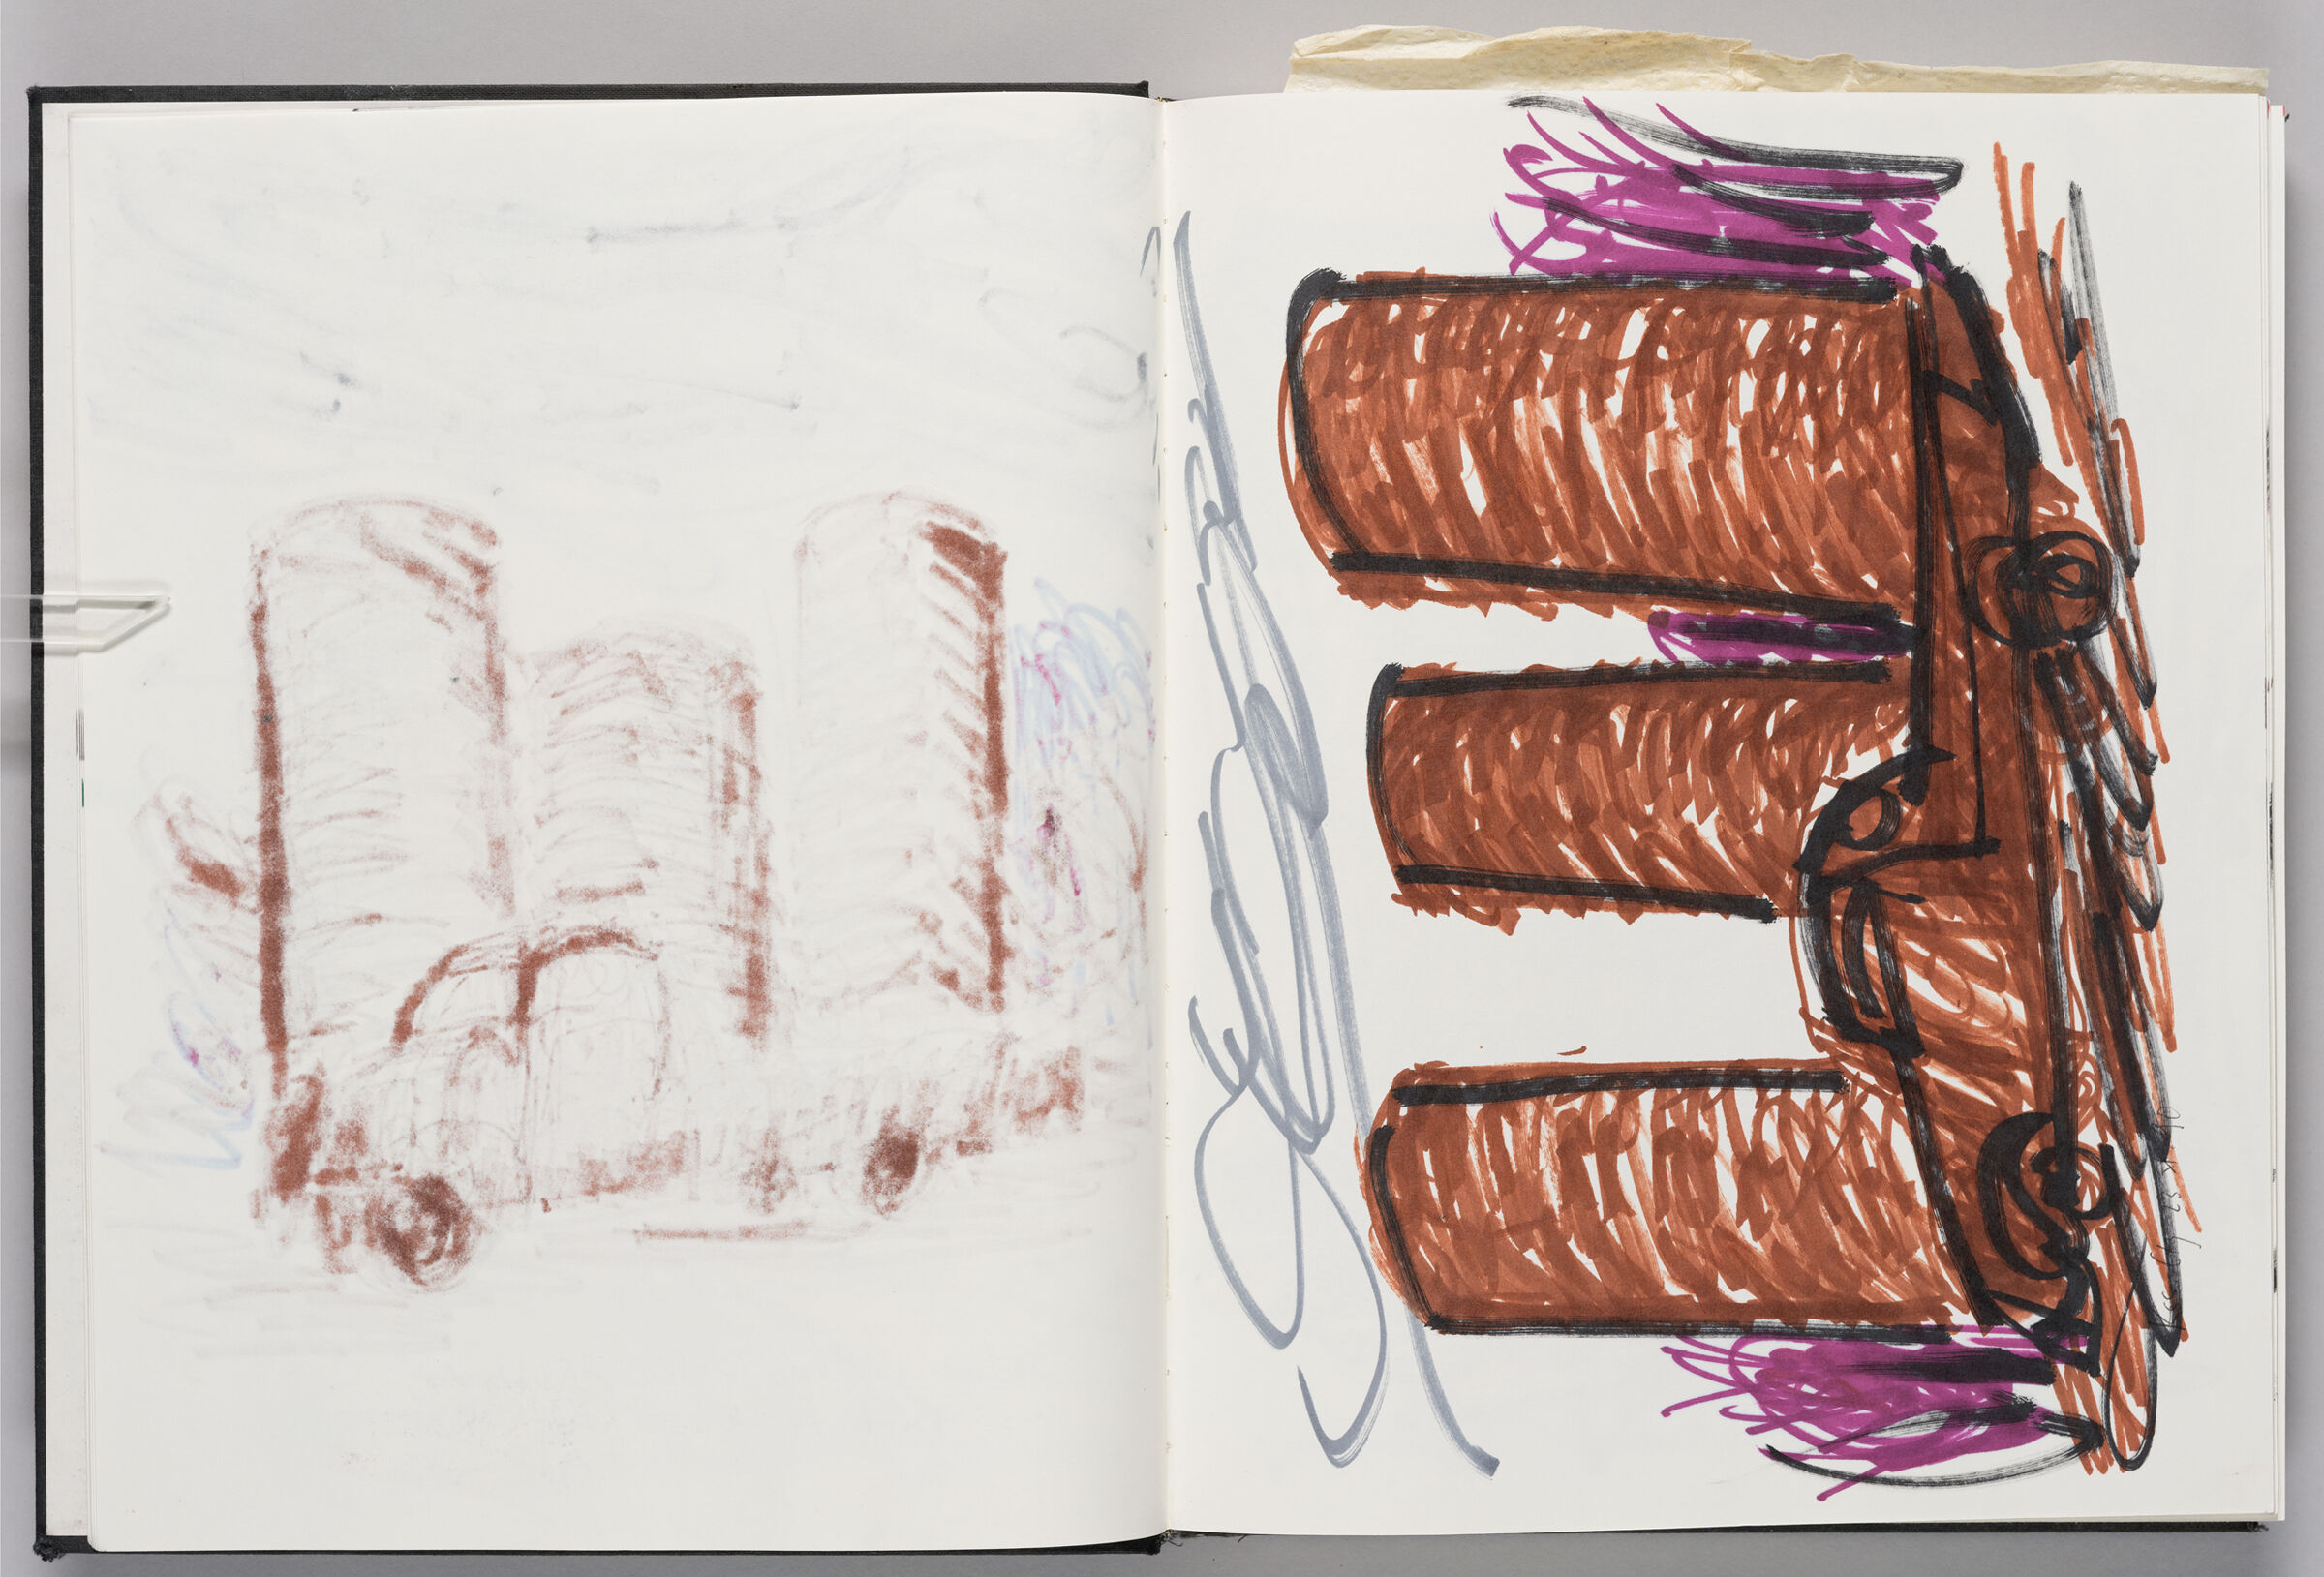 Untitled (Bleed-Through Of Previous Page, Left Page); Untitled (Car And Silos In Seligman, Mo, Right Page)